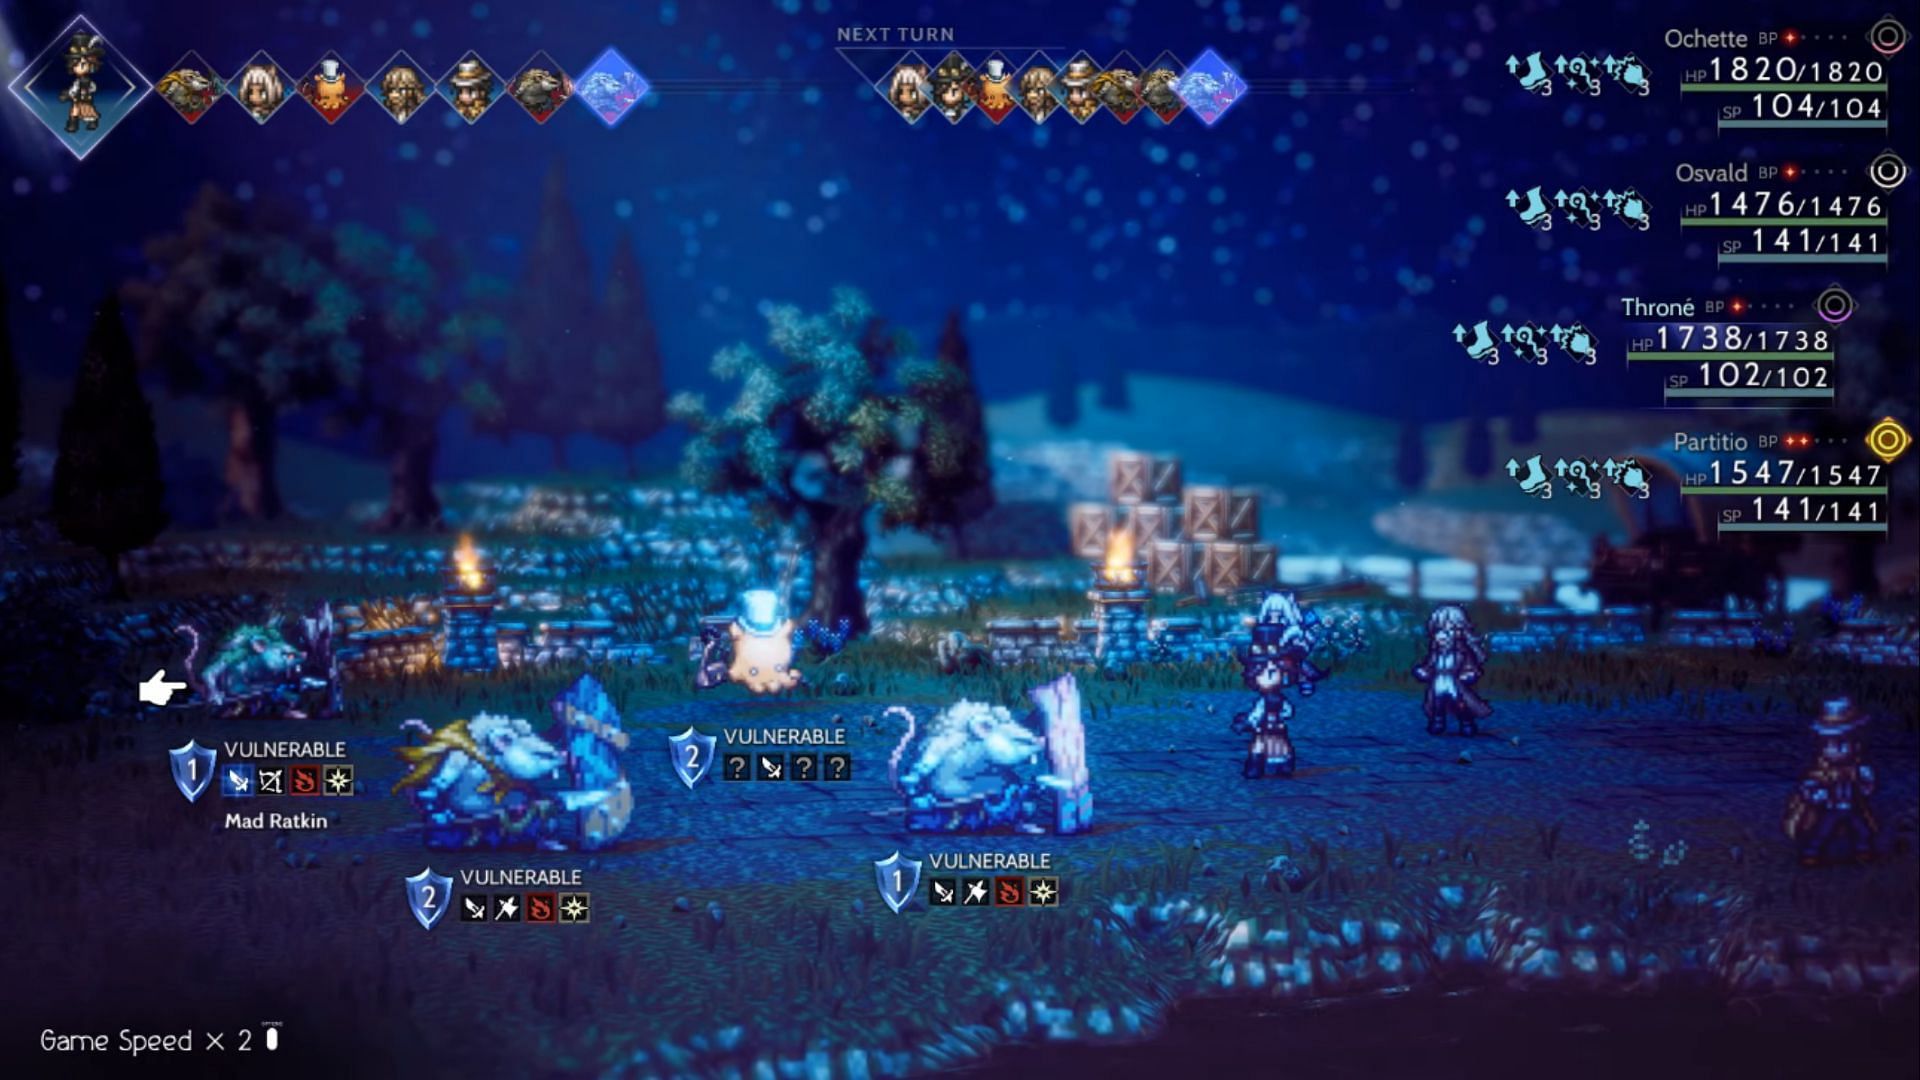 Octopath Traveler 2 Throne Background and Thief Class Breakdown